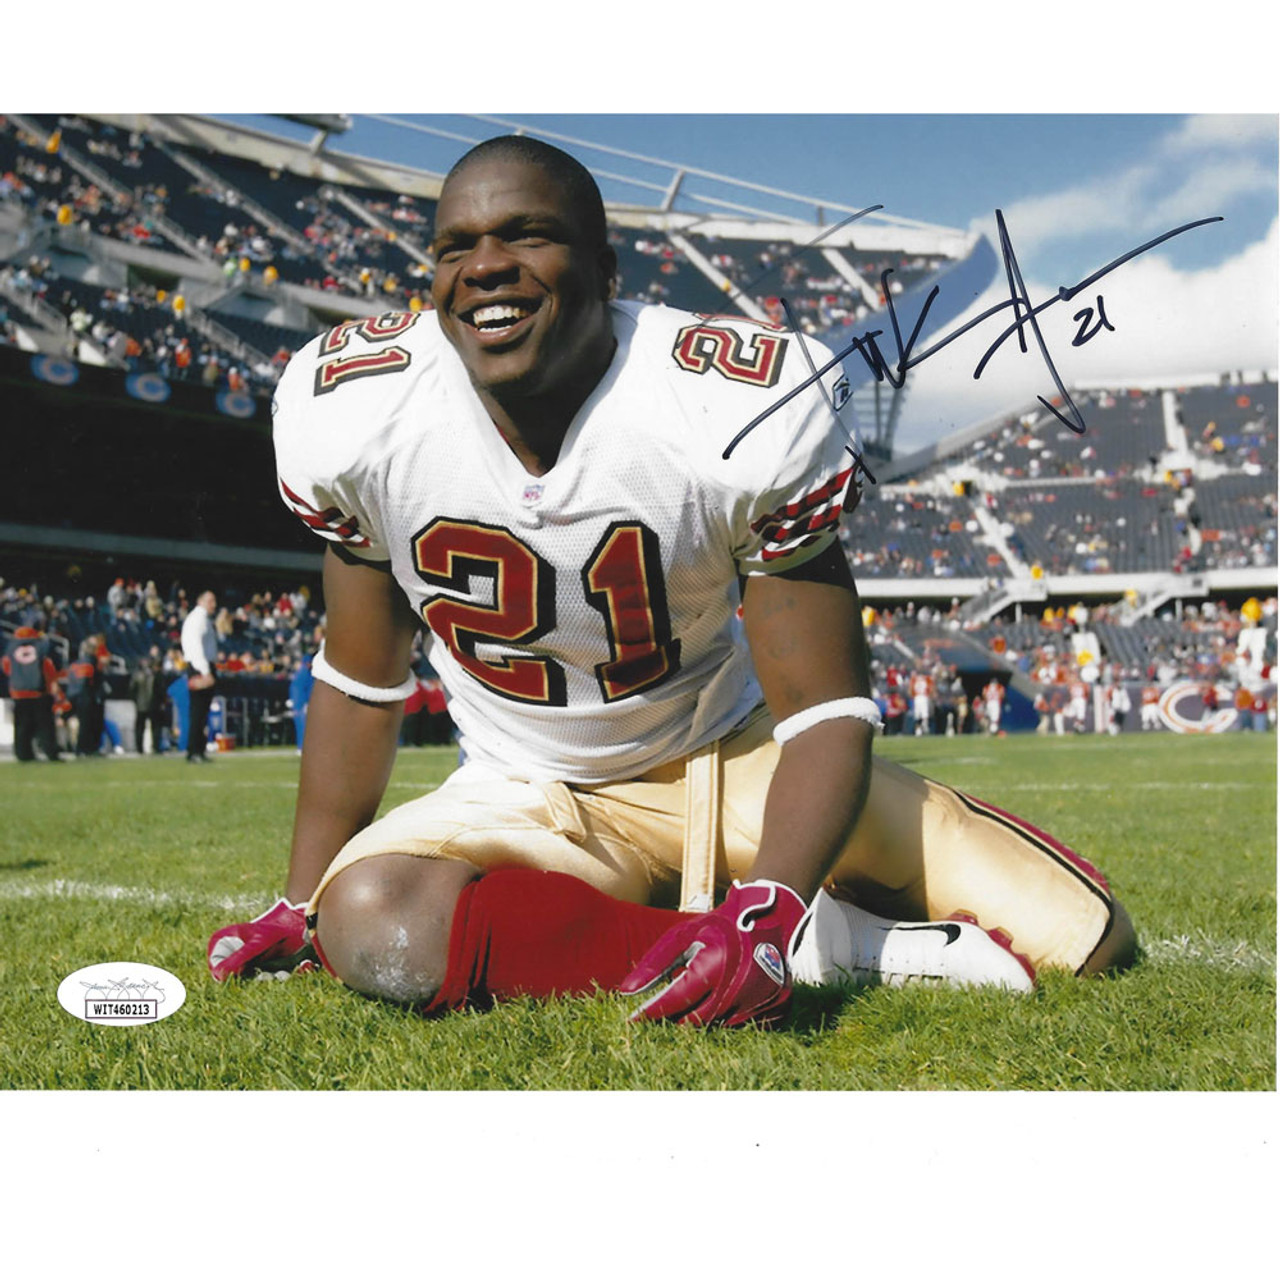 NFL San Francisco 49ers Frank Gore #21 8x10 Autographed Signed Picture  Photo JSA - Sinbad Sports Store